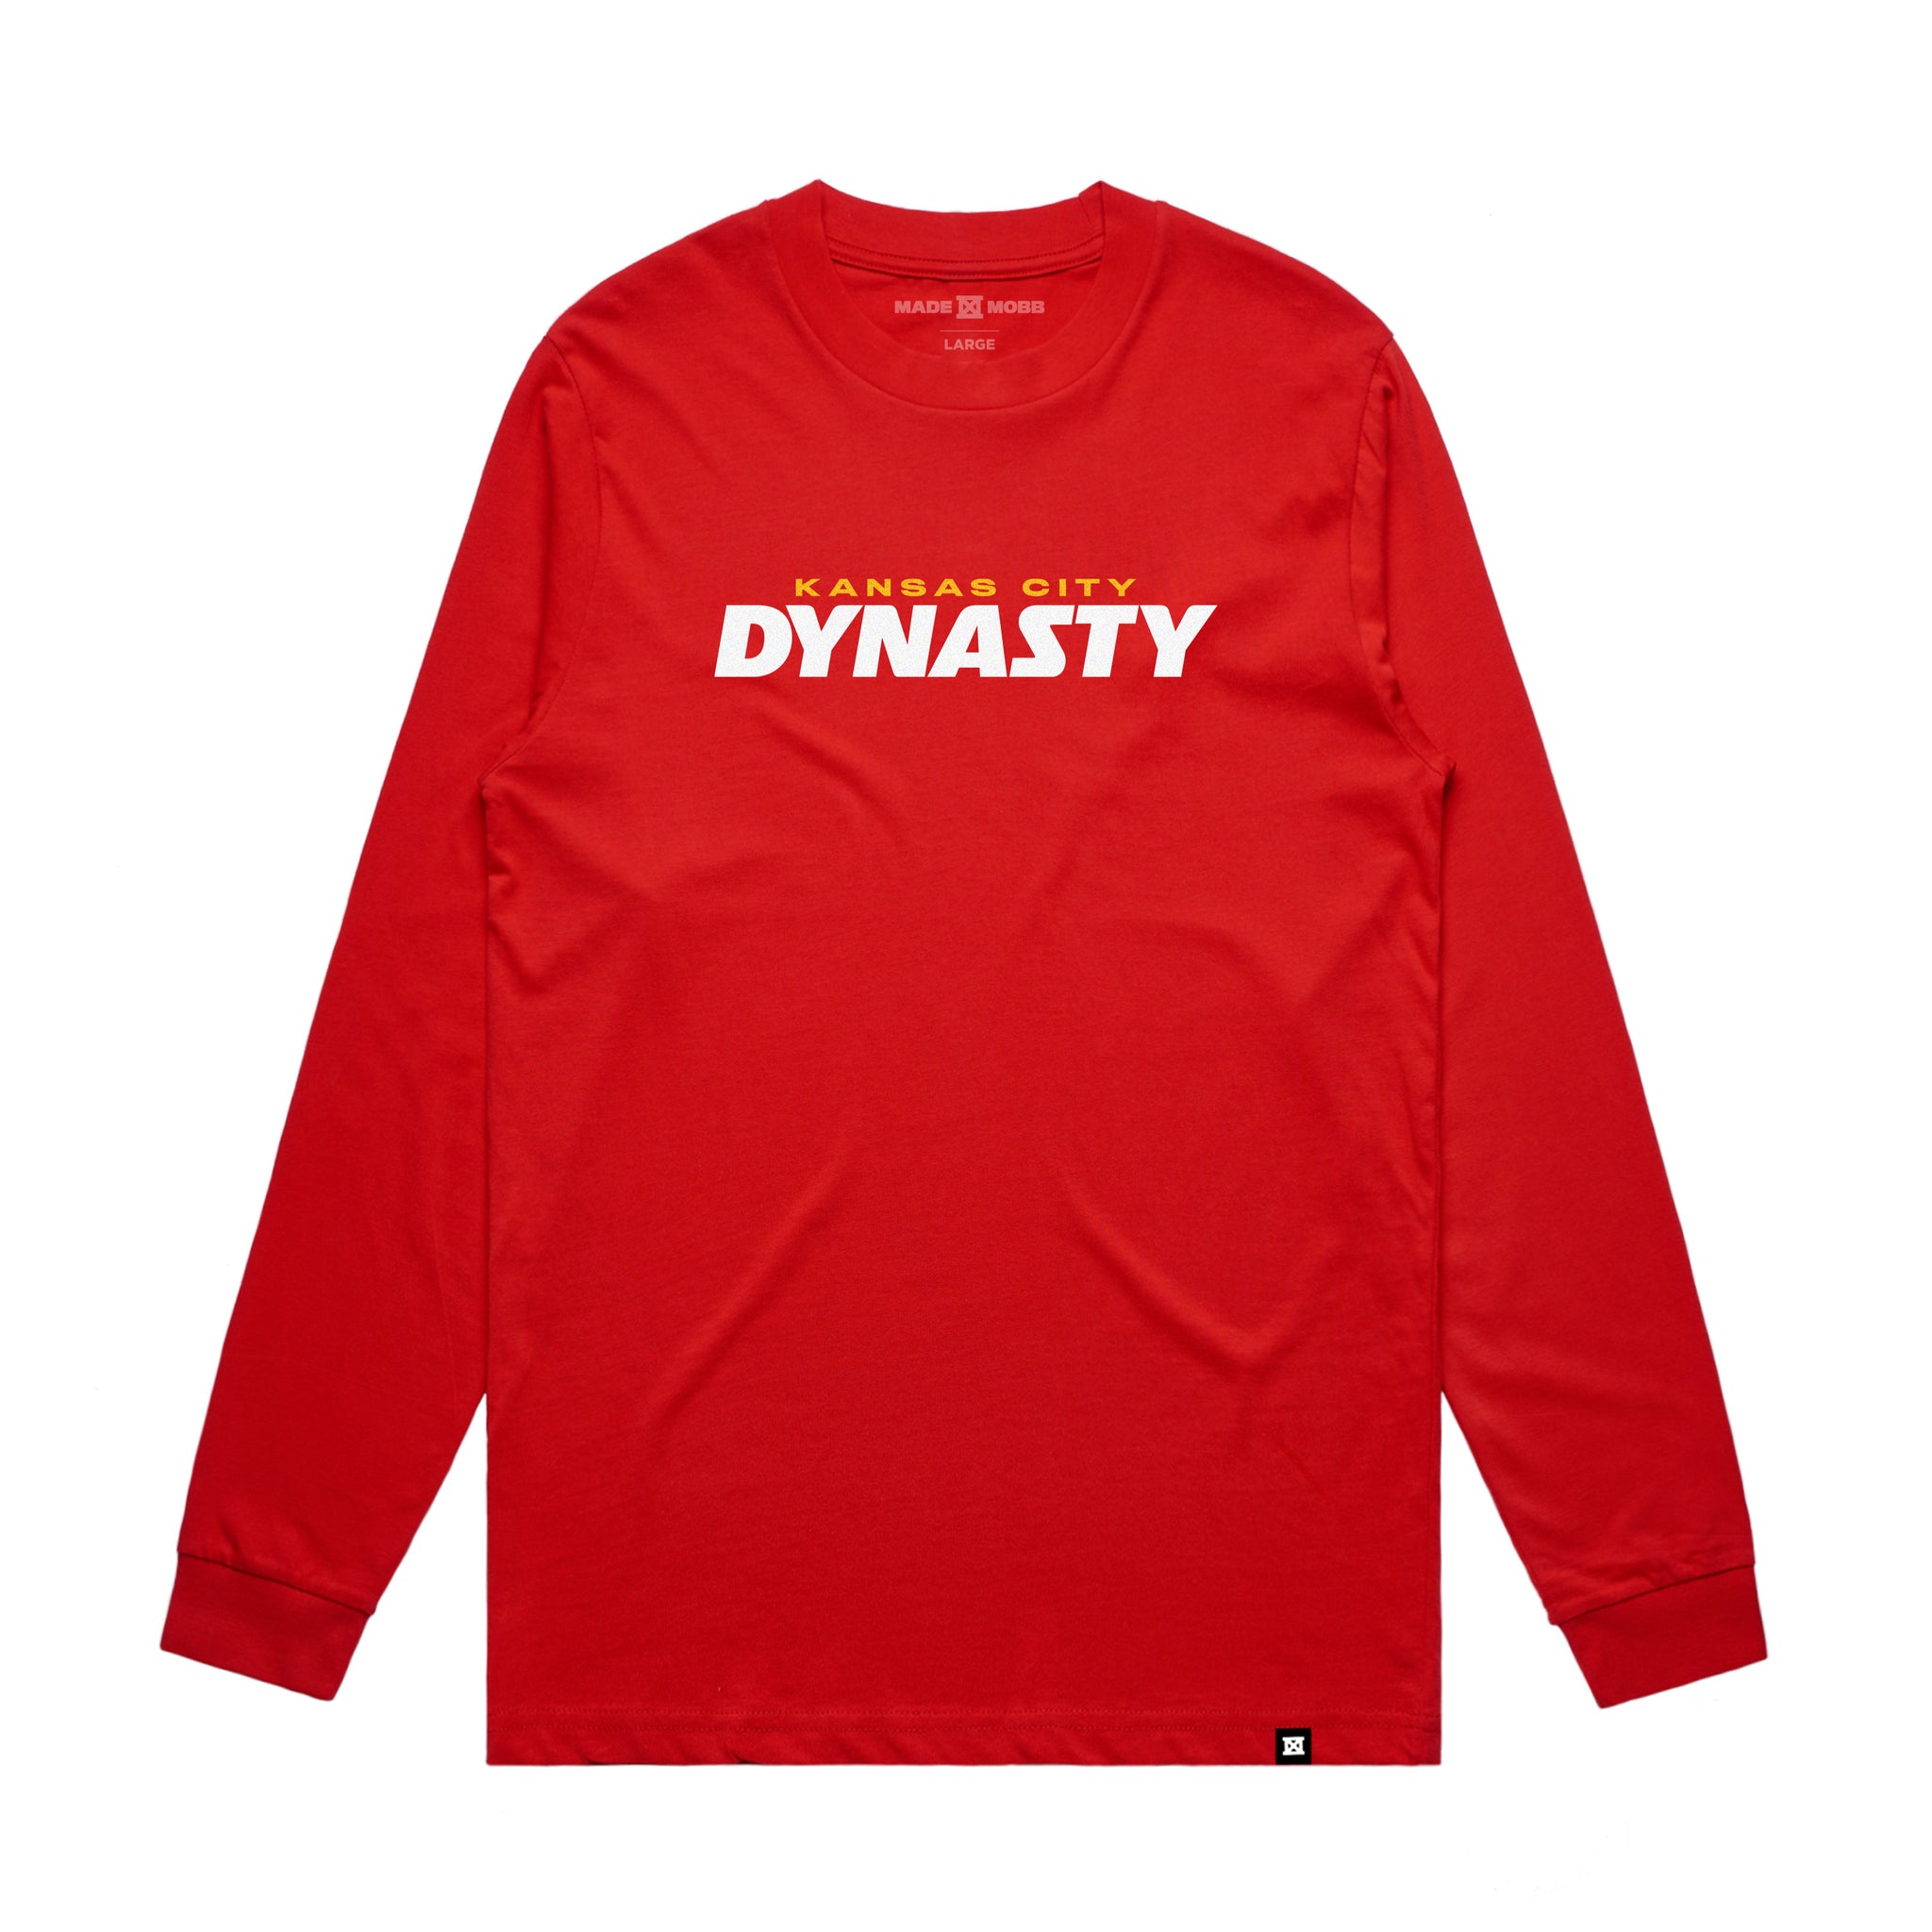 This Ain't Luck DYNASTY LS Tee